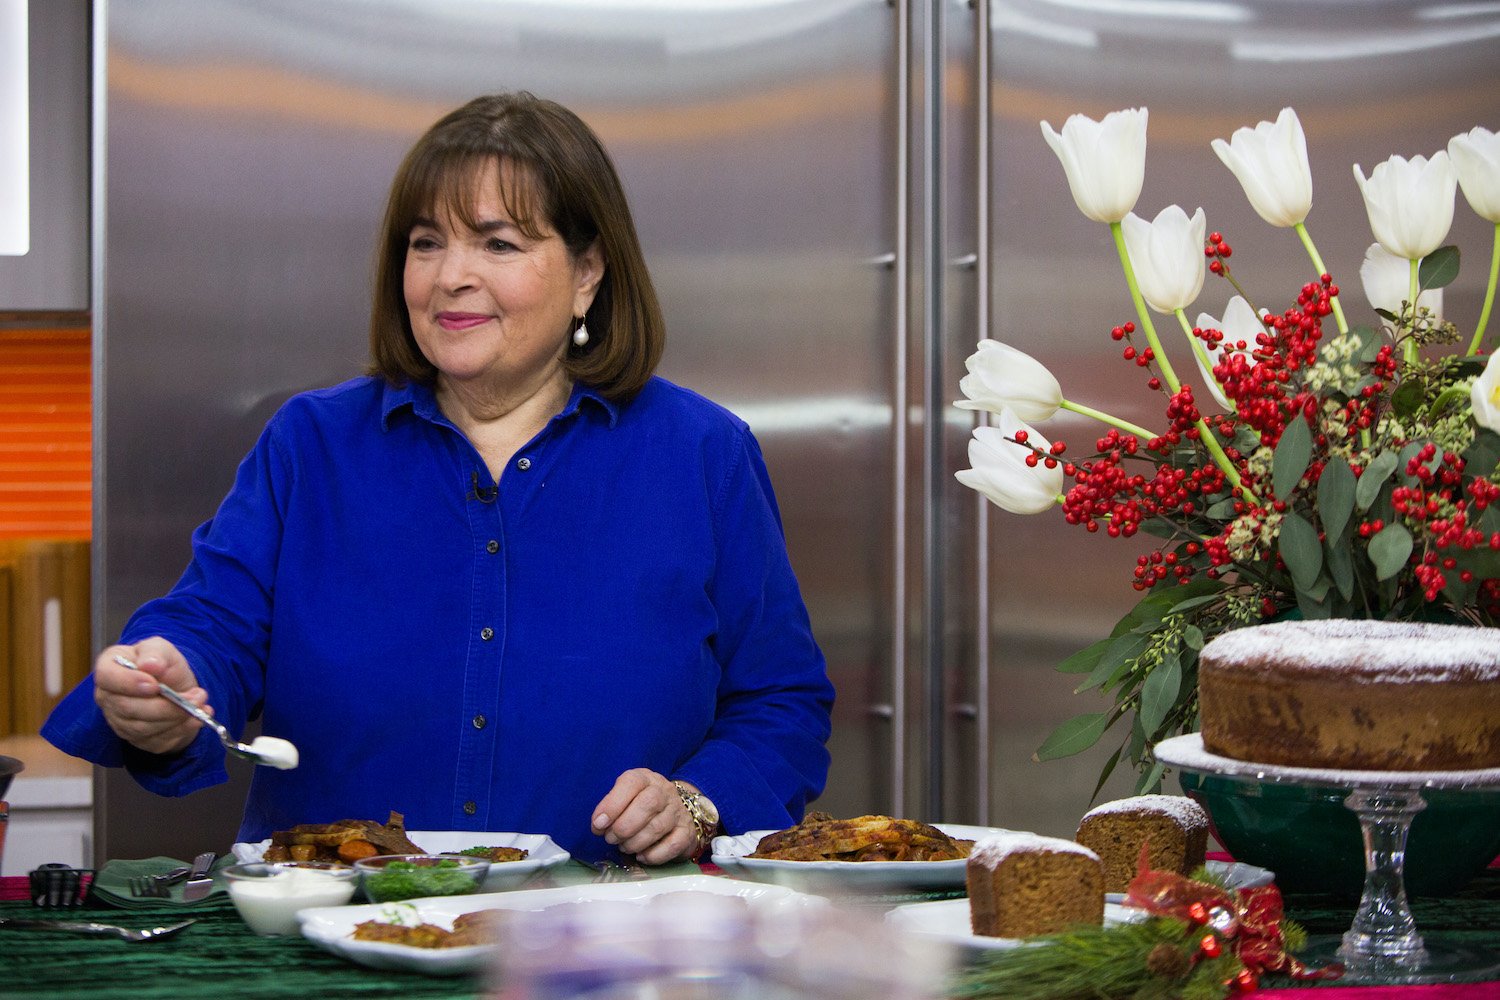 'Barefoot Contessa' Ina Garten on the Today show in 2017